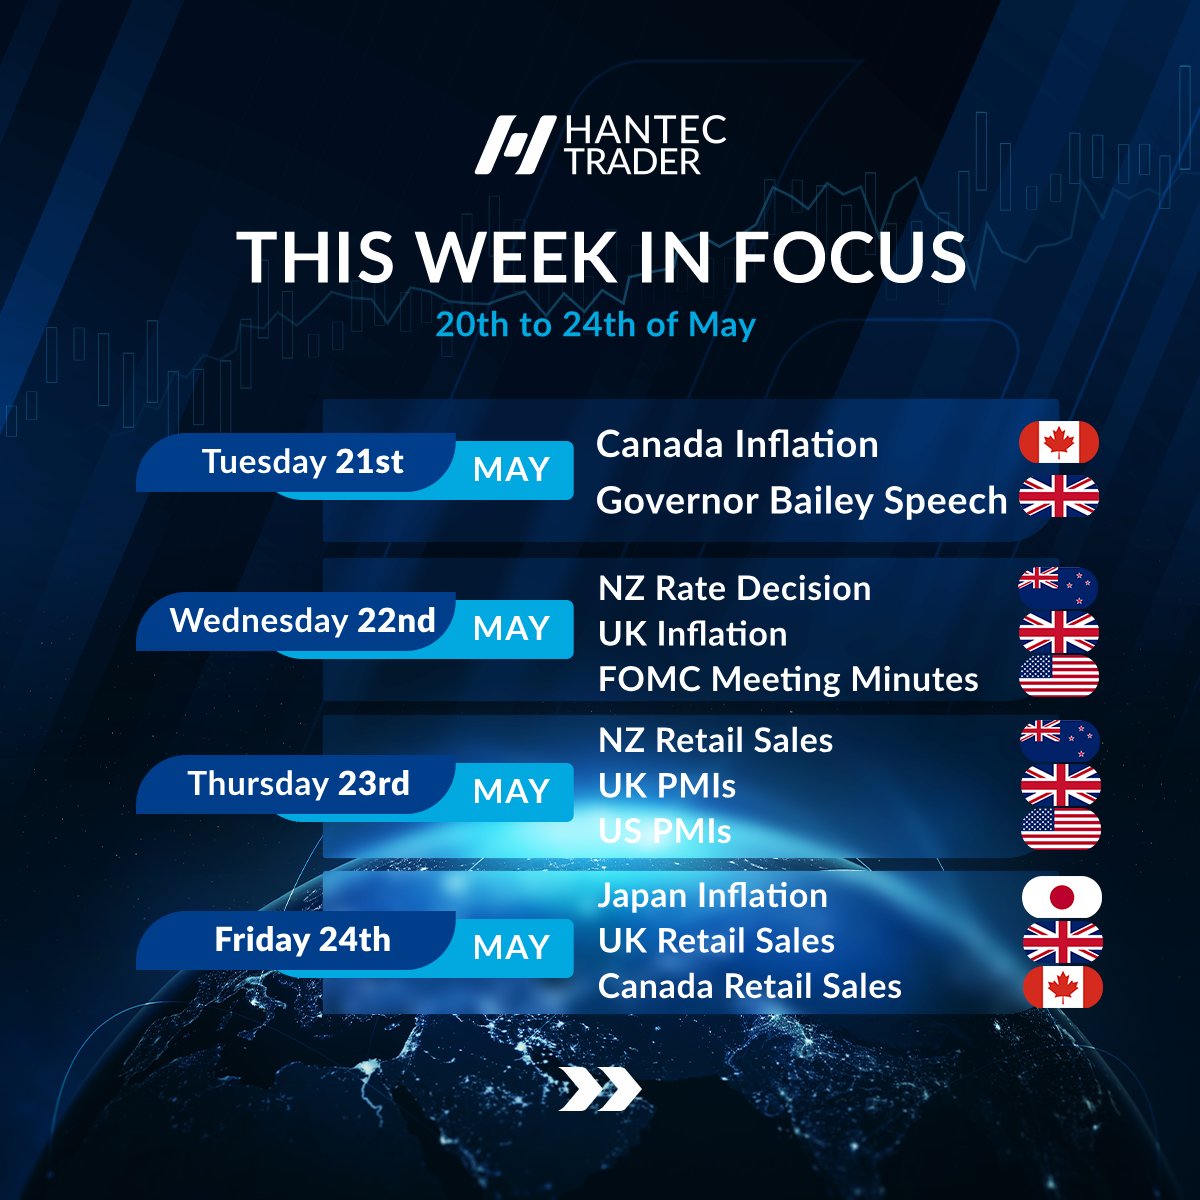 Stay ahead in the financial markets with Hantec Trader’s weekly overview. Don’t miss any updates that could influence your trading strategies!

#HantecTrader #PropTrading #Trading #Forex #WeeklyEvents